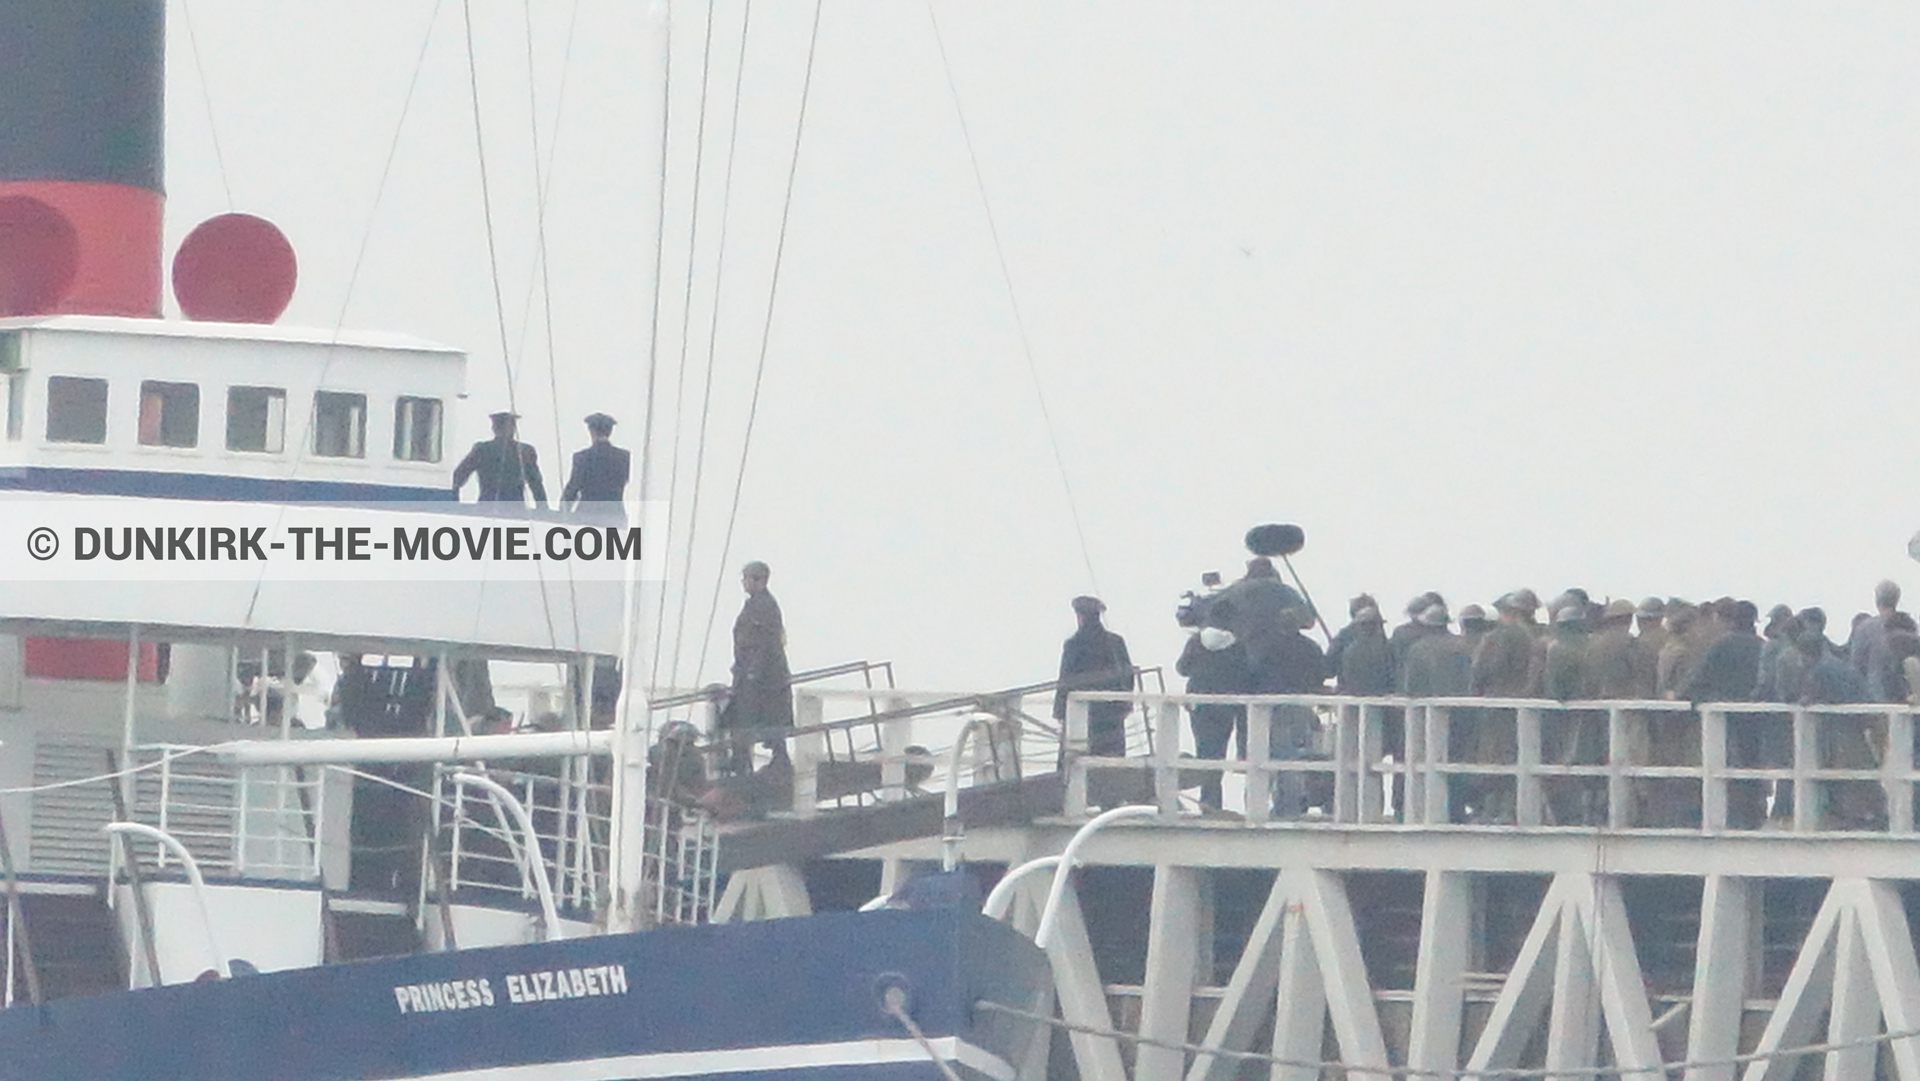 Picture with grey sky, supernumeraries, Hoyte van Hoytema, EST pier, Princess Elizabeth,  from behind the scene of the Dunkirk movie by Nolan